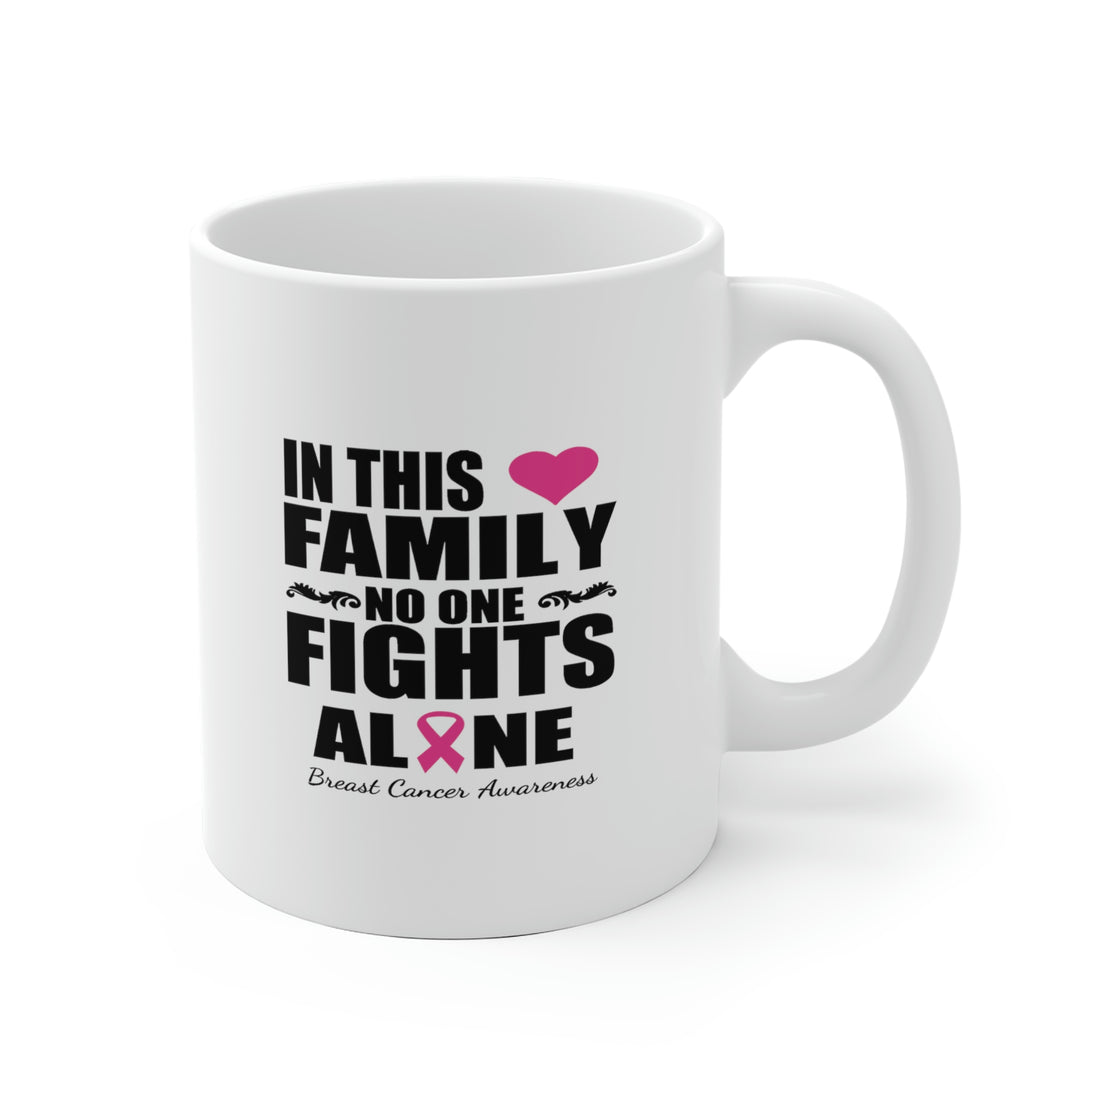 In This Family No One Fights Alone - White Ceramic Mug 2 sizes Available